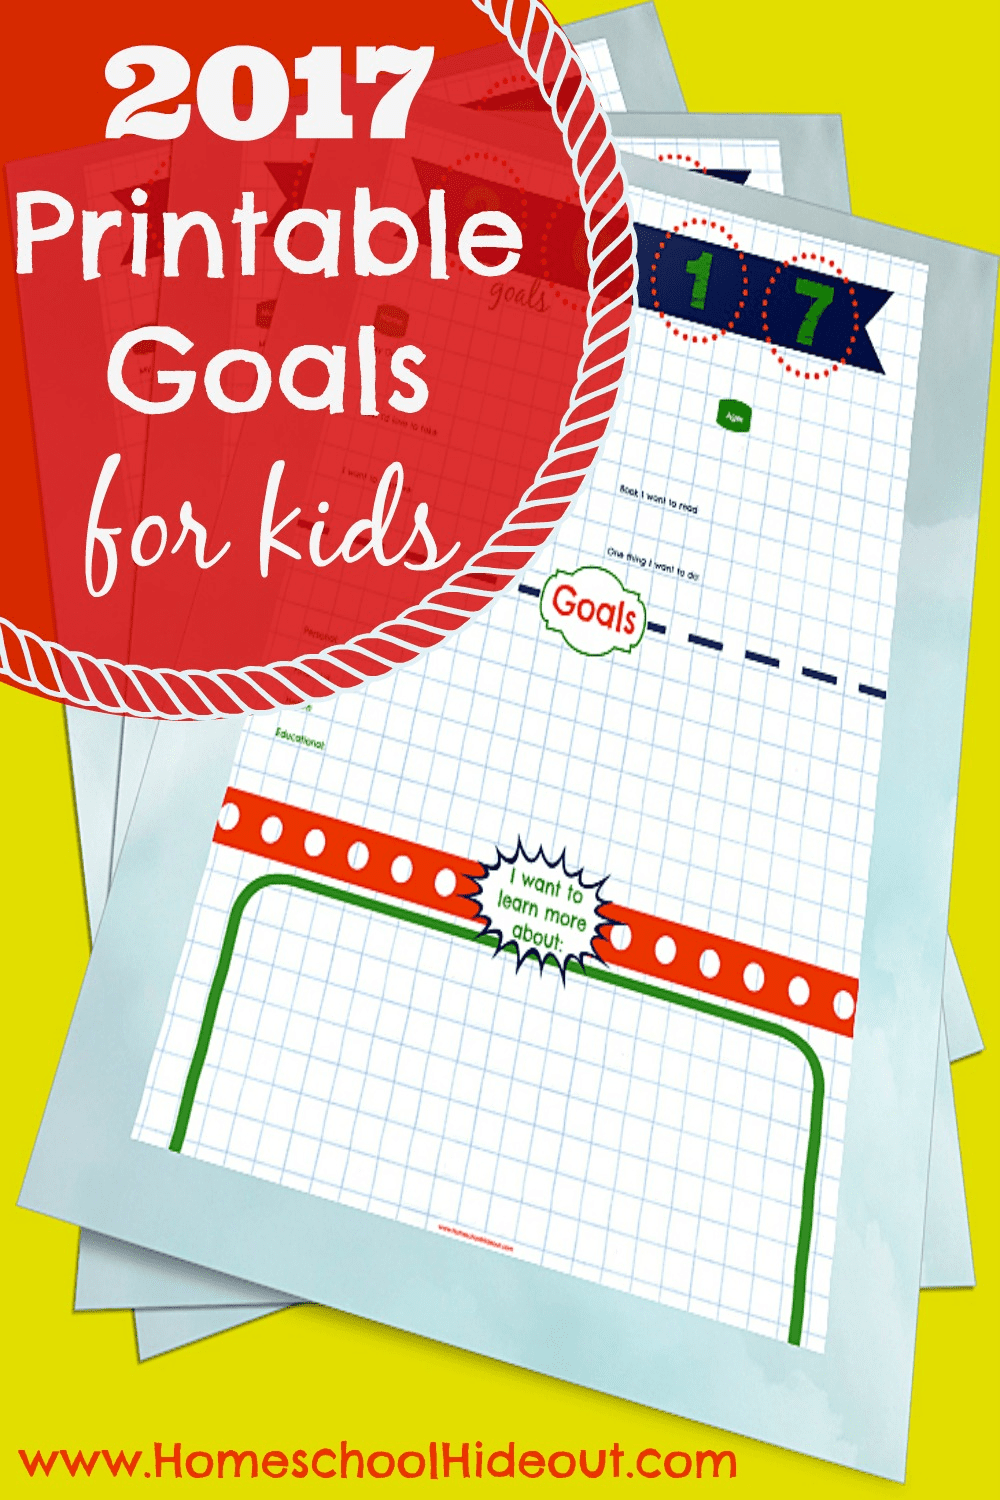 Setting goals for kids is one of the best habits to teach. Let them know they can work hard to reach their goals. I love the categories on this free goal printable!